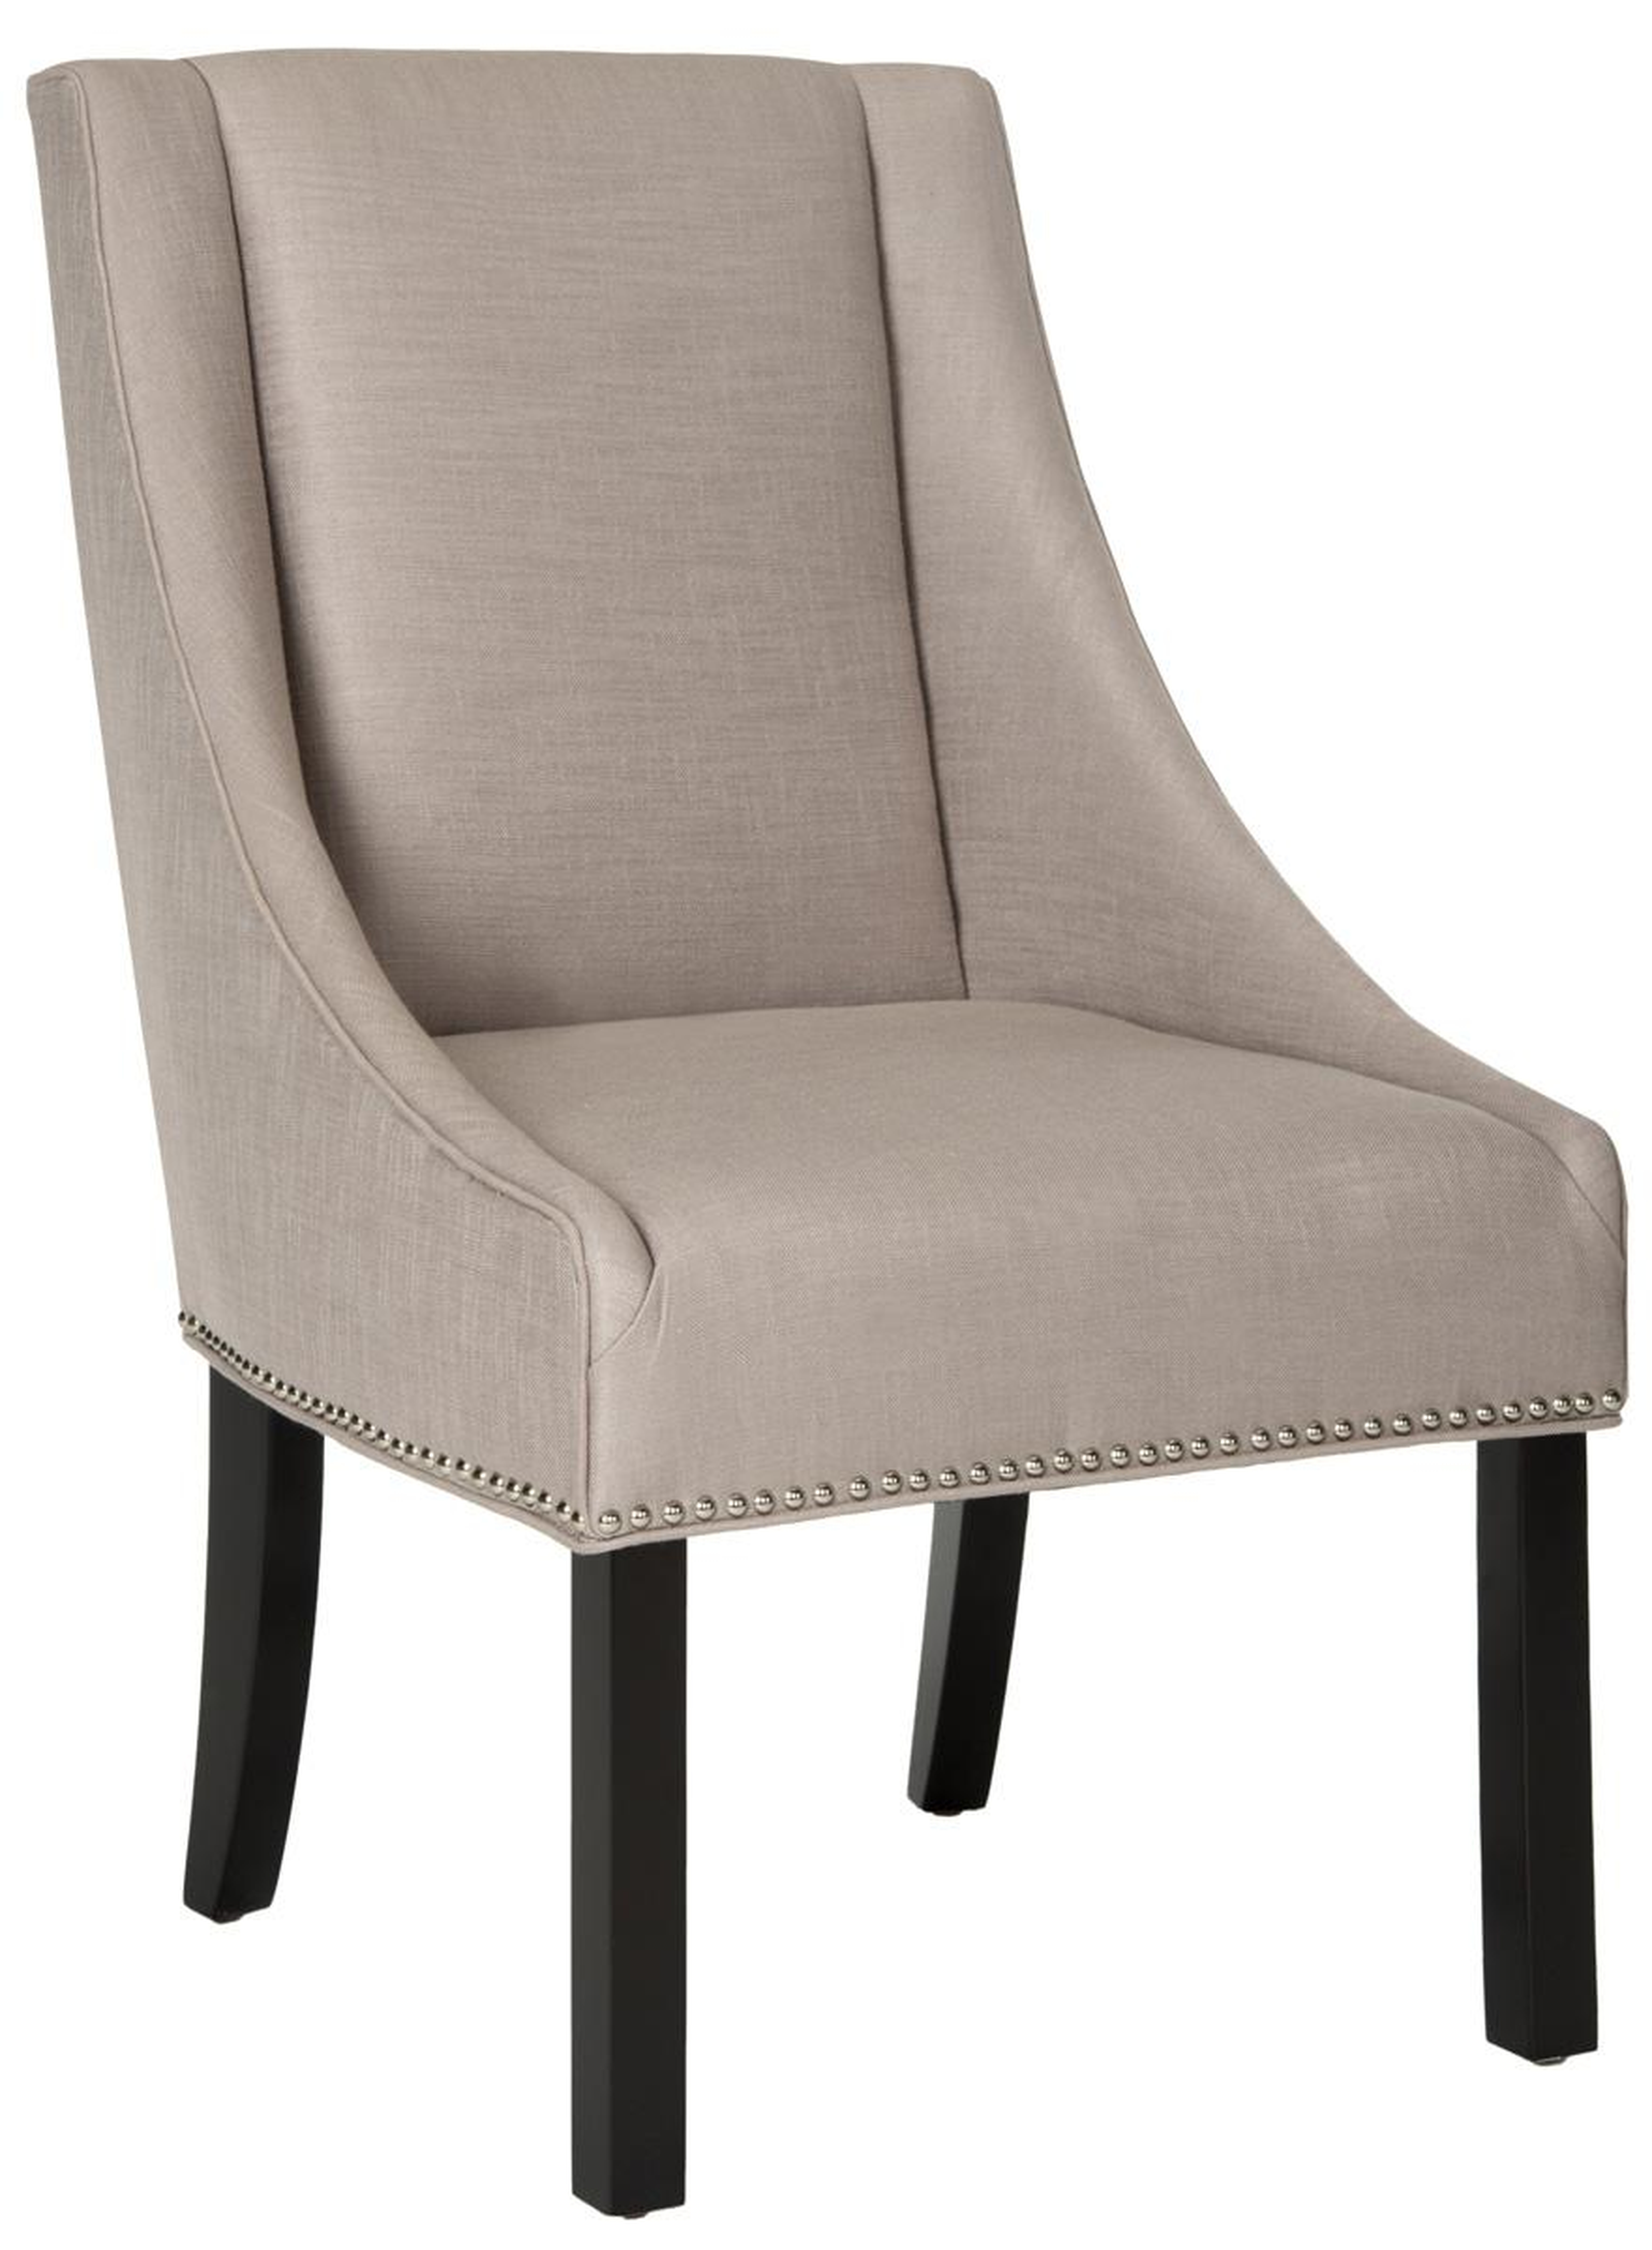 Morris 20''H Sloping Arm Dining Chair (Set Of 2) - Silver Nail Heads - Oyster/Espresso - Arlo Home - Arlo Home